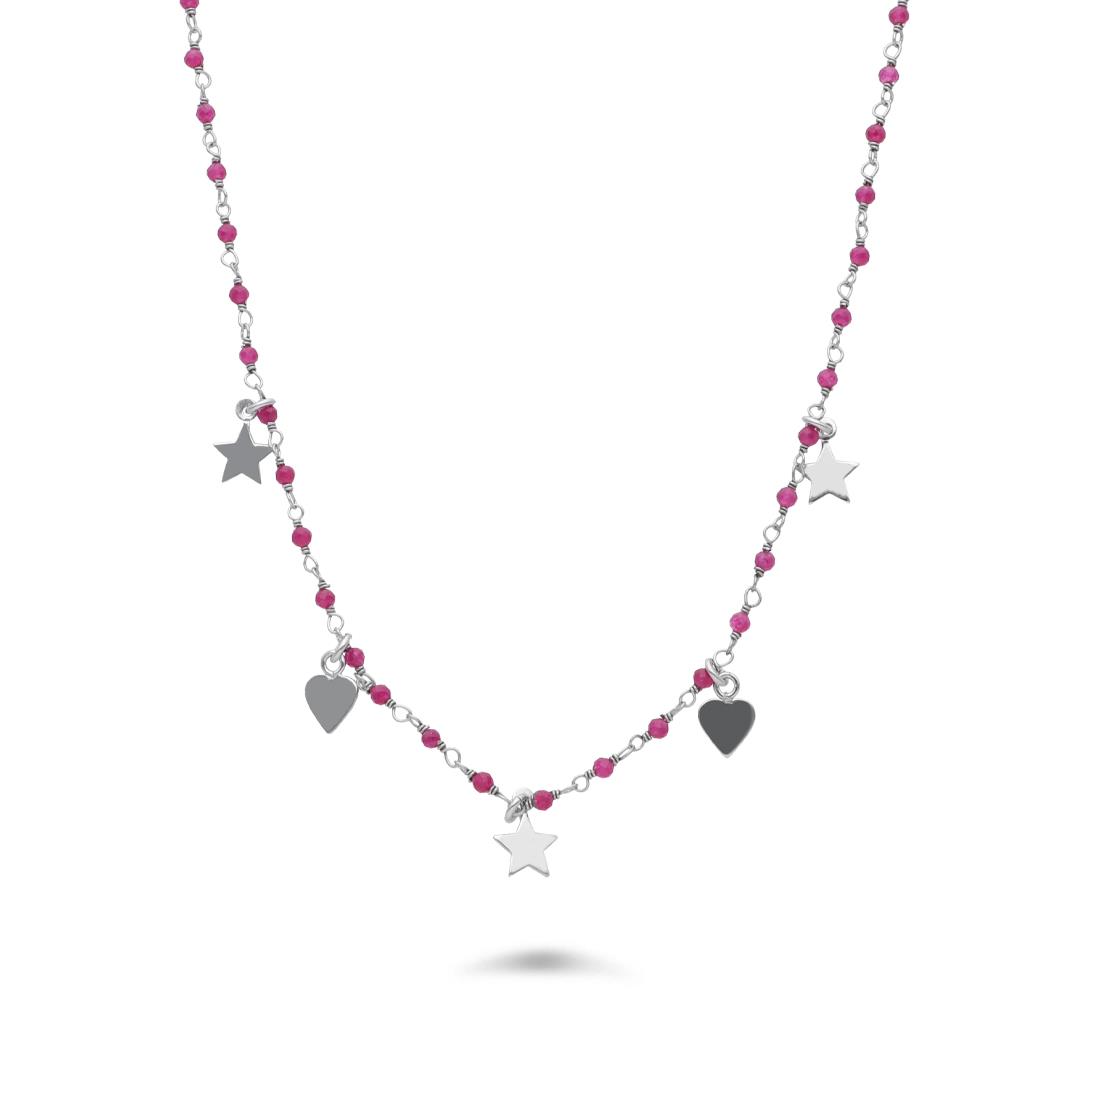 Silver necklace with fuchsia stones and pendants - ORO&CO 925